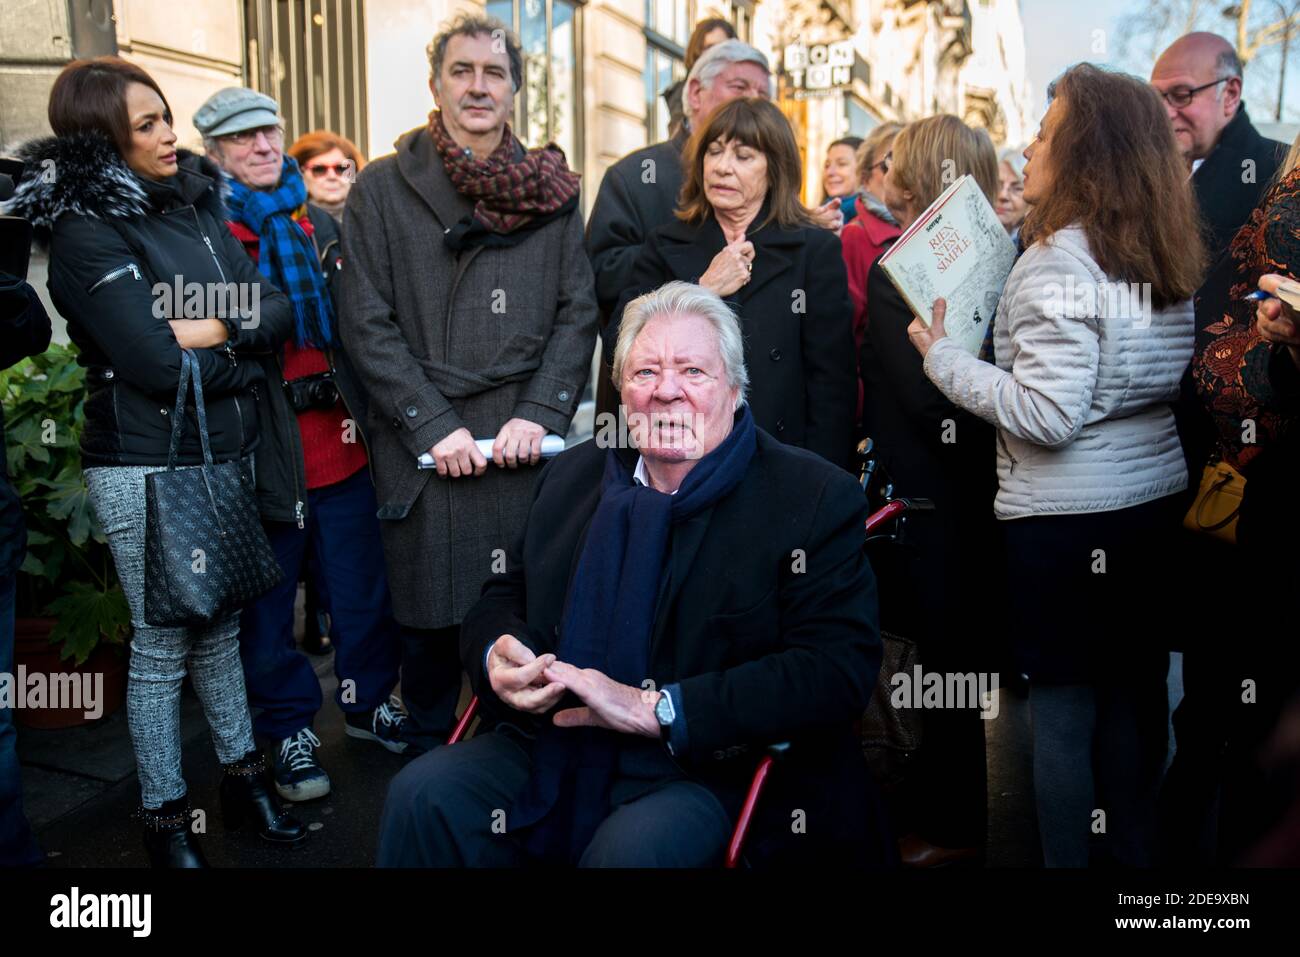 Jean-Jacques Sempe (seated) attends the unveiling of a wall fresco from one of his artwork, along side François Morel, at the crossing of Boulevard des Filles du Calvaire and Rue Froissard, 3rd District of Paris, France, Febuary 16, 2019. Photo by Denis PrezatAvenir Pictures/ABACAPRESS.COM Stock Photo